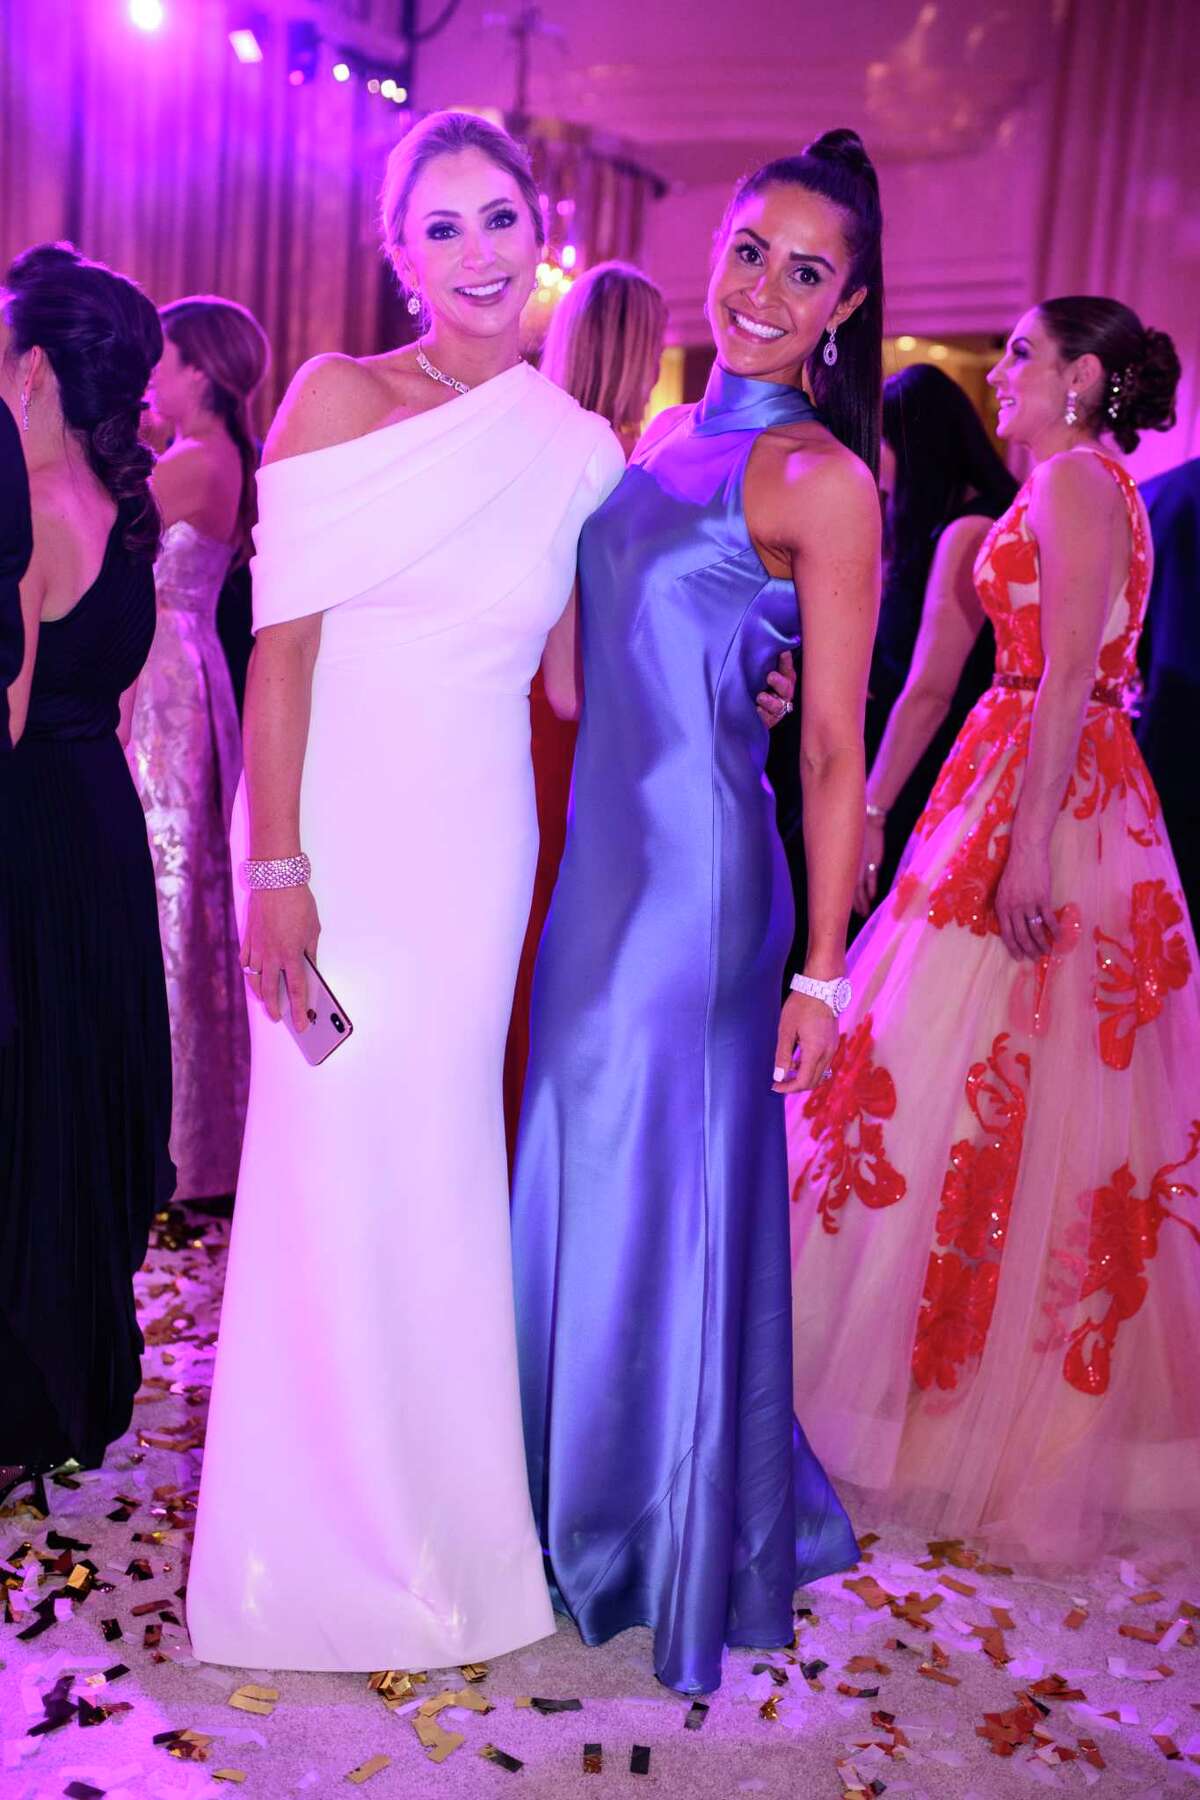 Chita Craft and Lauren Cox at the 50th anniversary Ballet Ball at The Wortham Theater Center in Downtown Houston, TX on Saturday, February 22, 2020